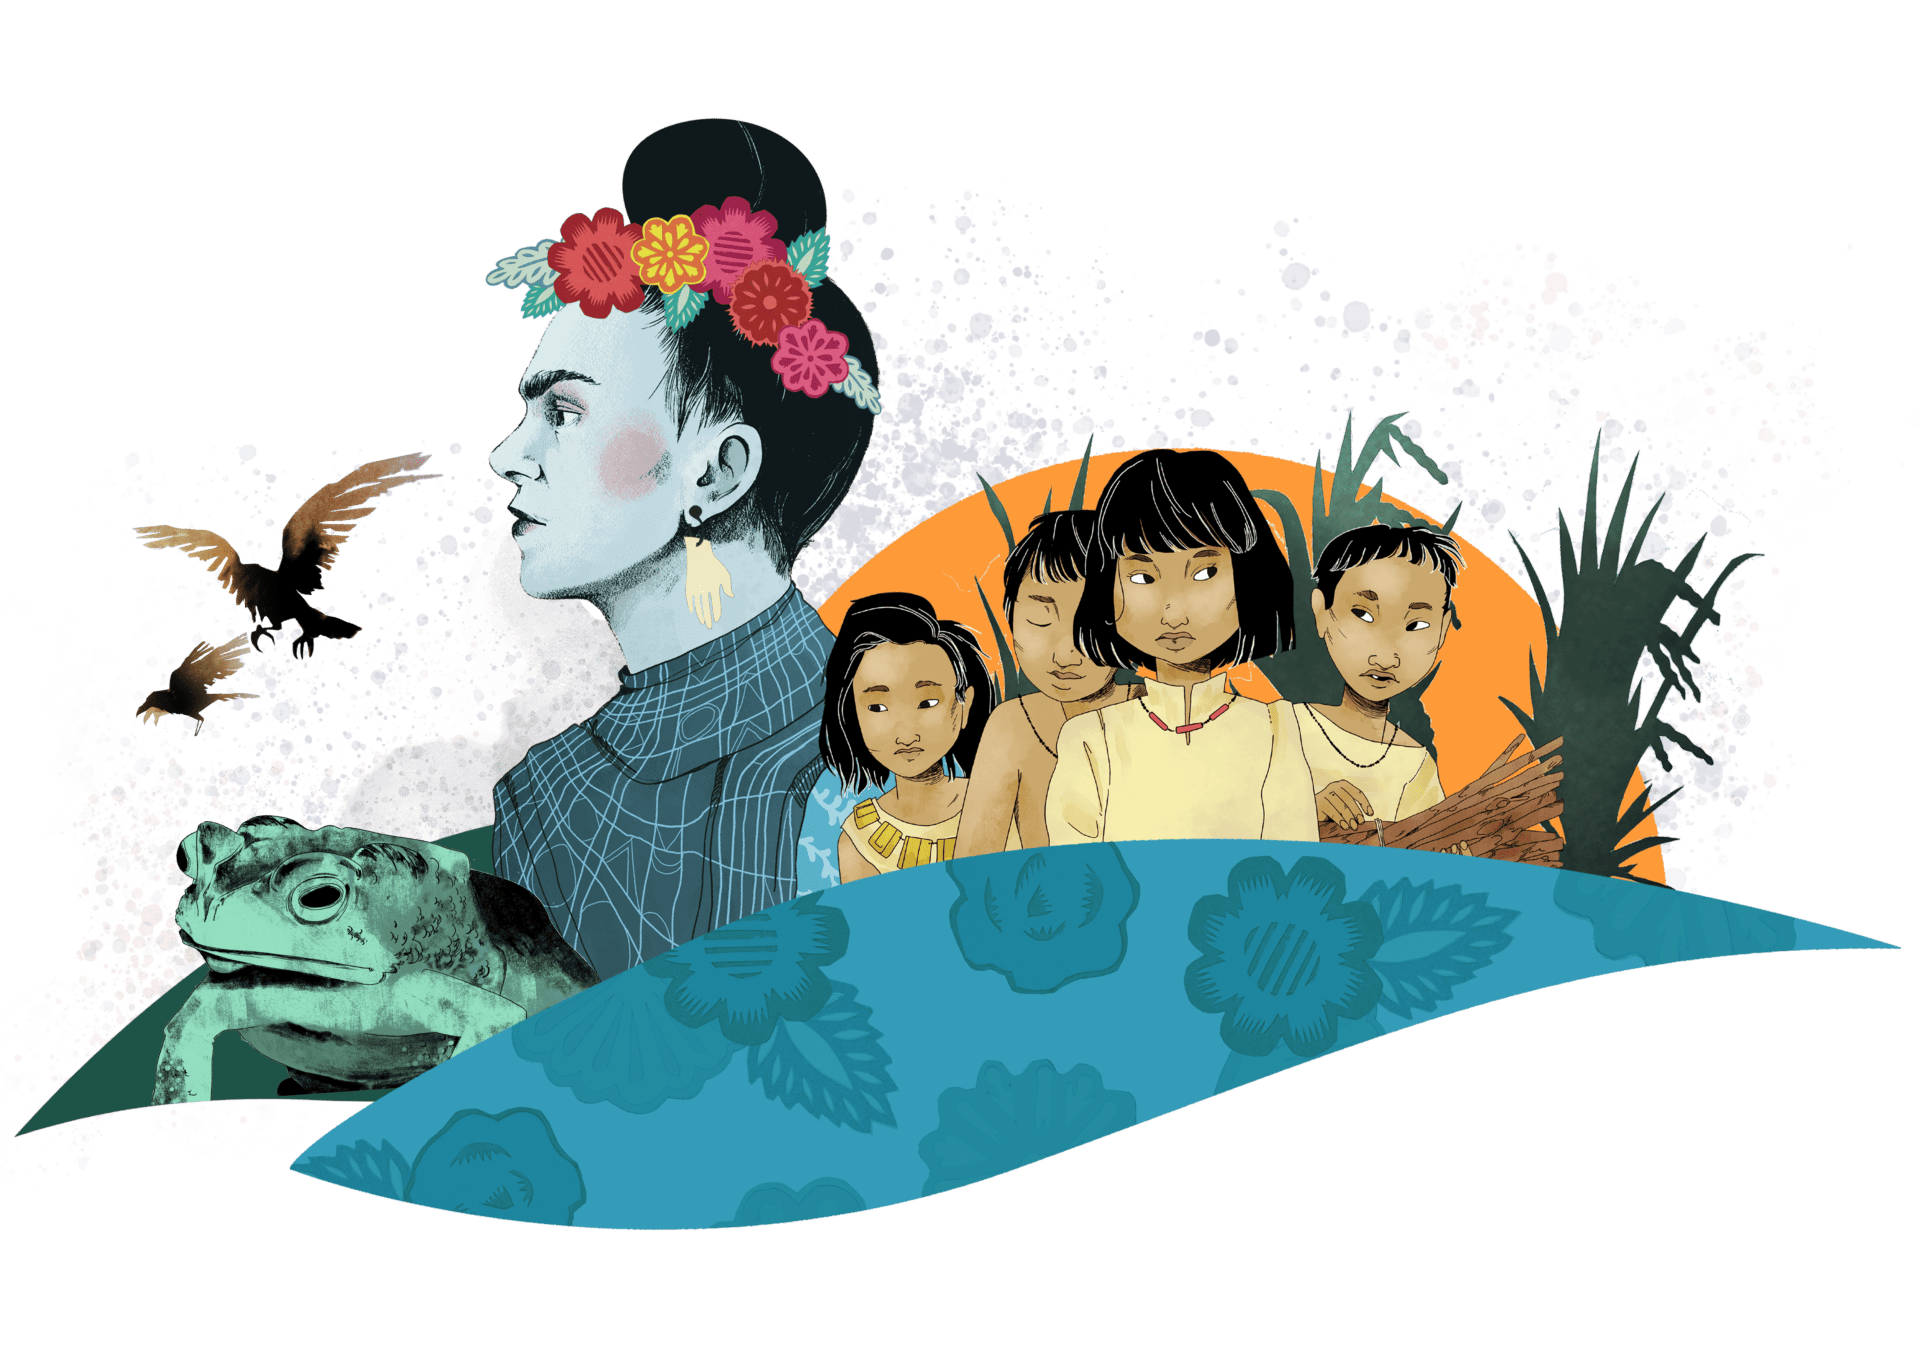 Illustration of a diverse group of people and animals including a woman with flowers in her hair, children, a frog, and a bird, set against a colorful, nature-inspired background.